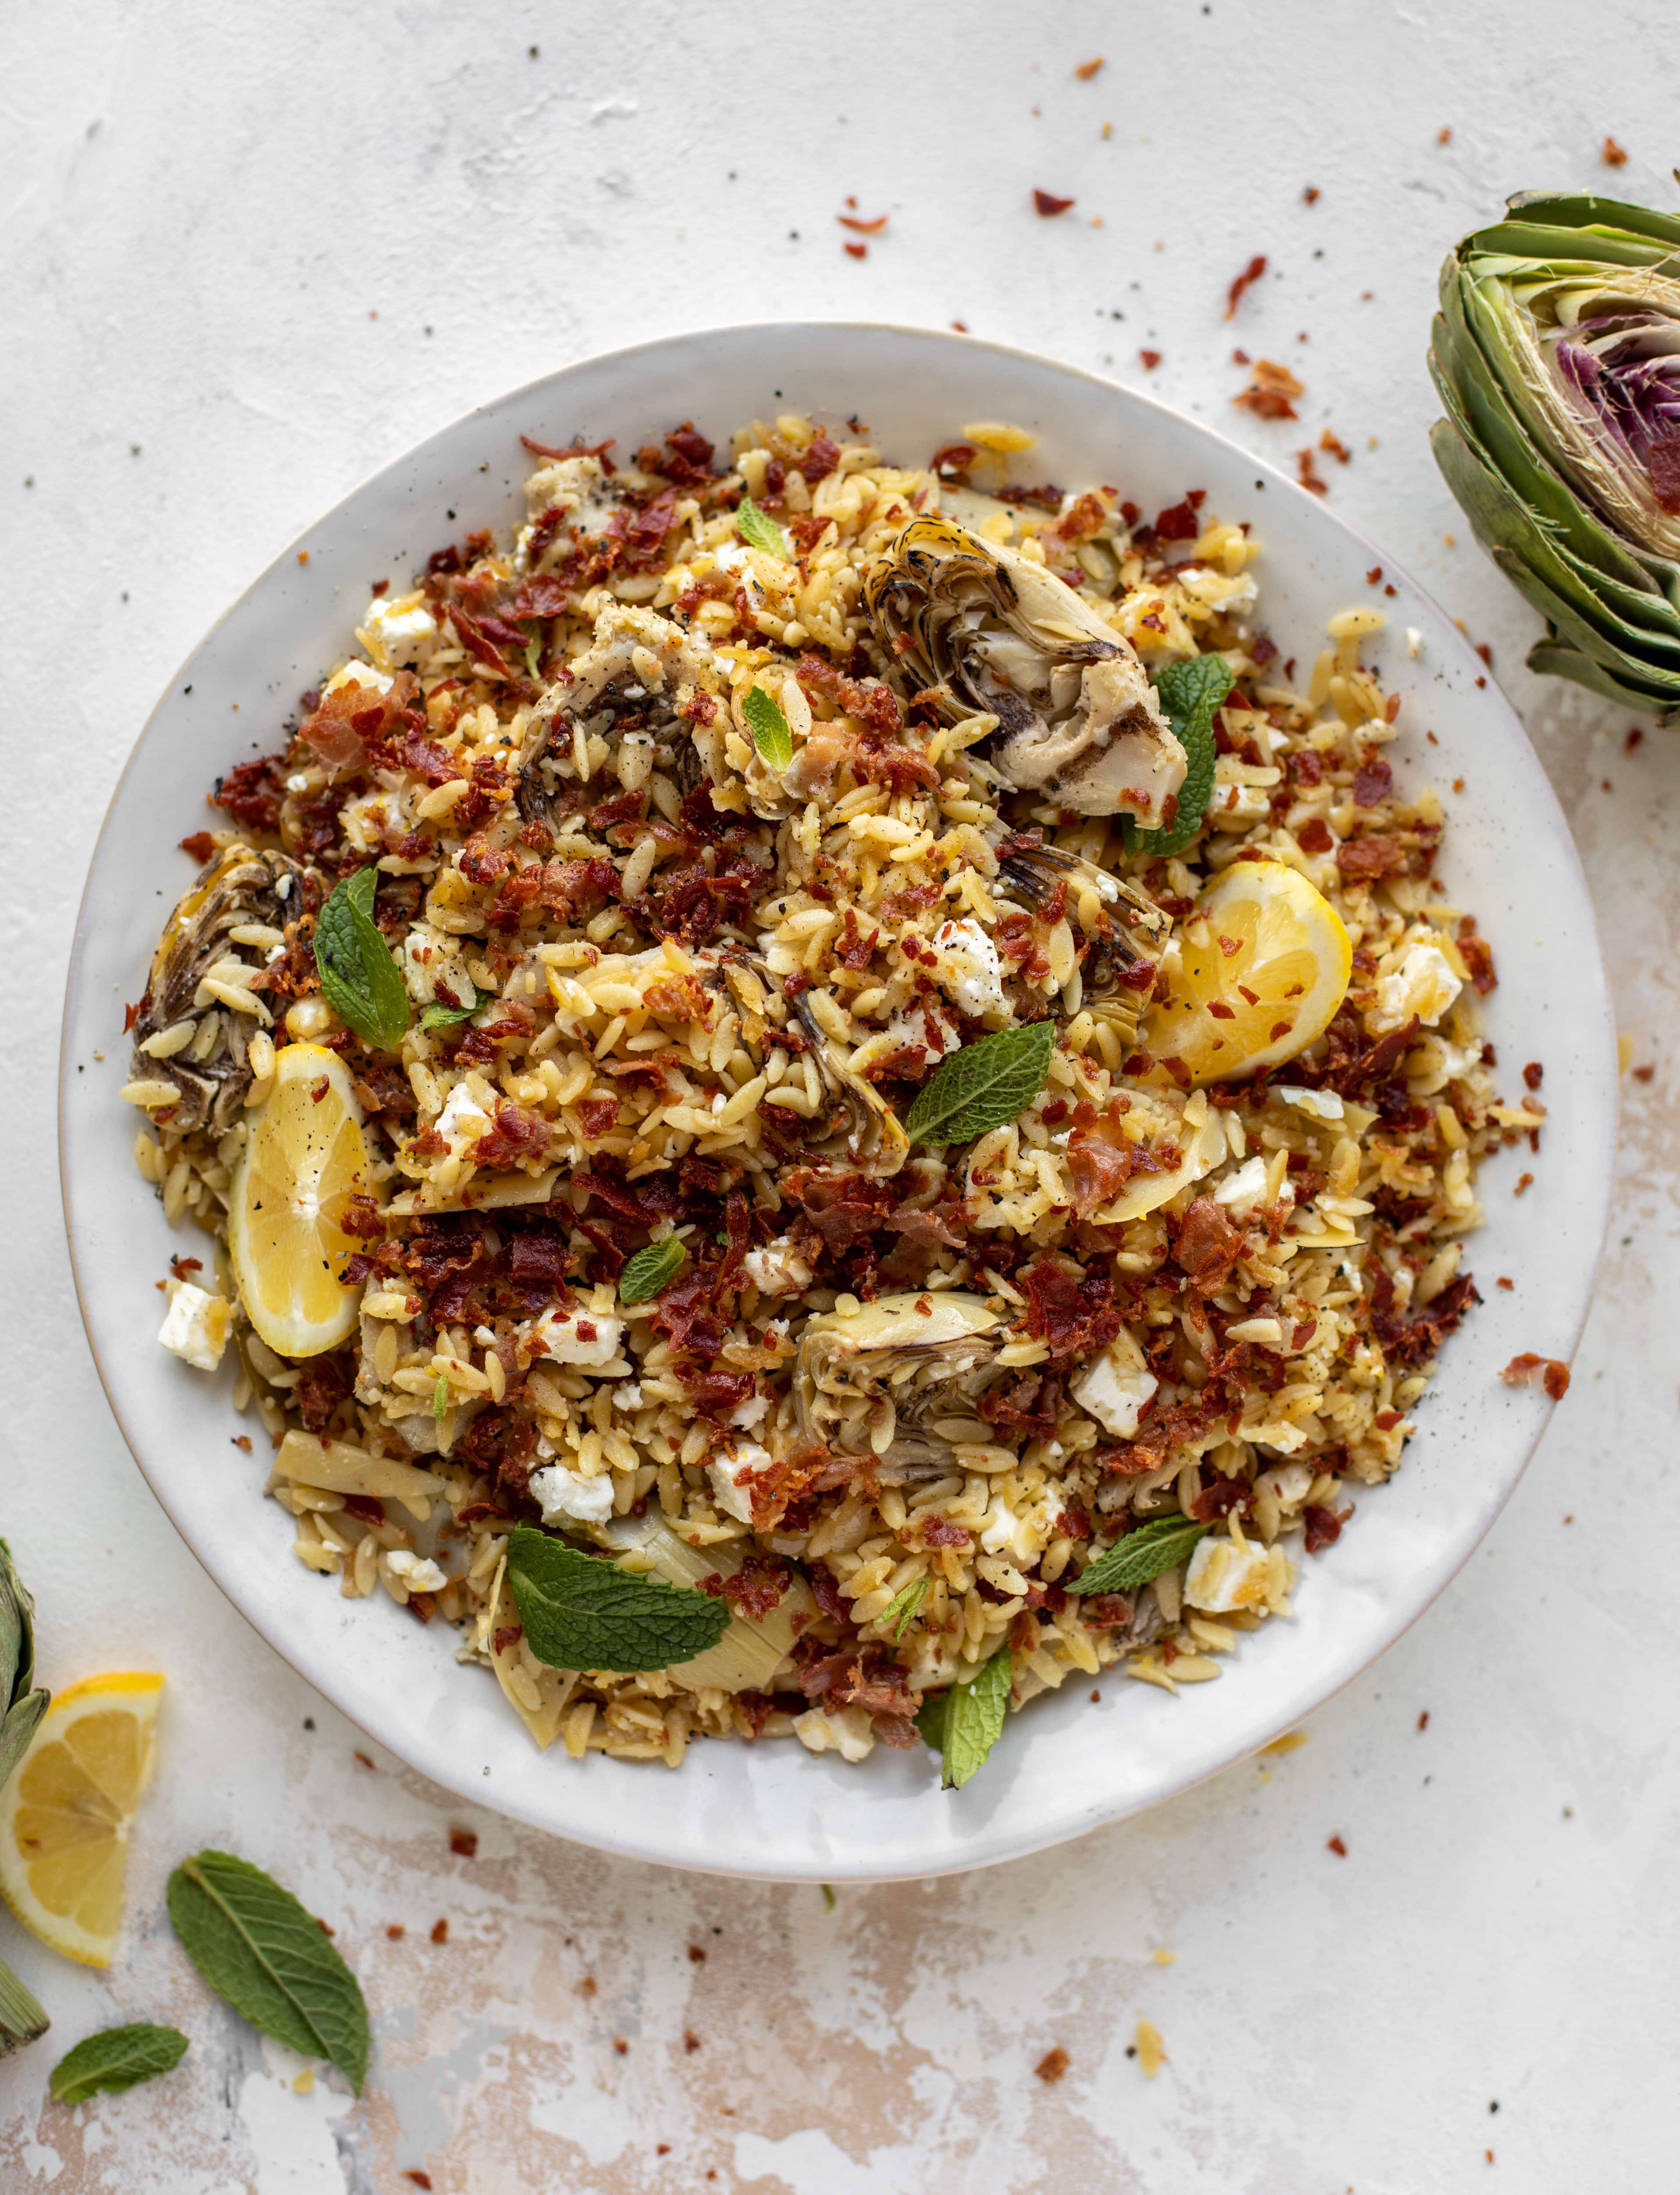 This crispy orzo is a wonderful spring dish. Artichoke hearts, lemon, goat cheese and herbs all topped with a sprinkling of crunchy prosciutto. 